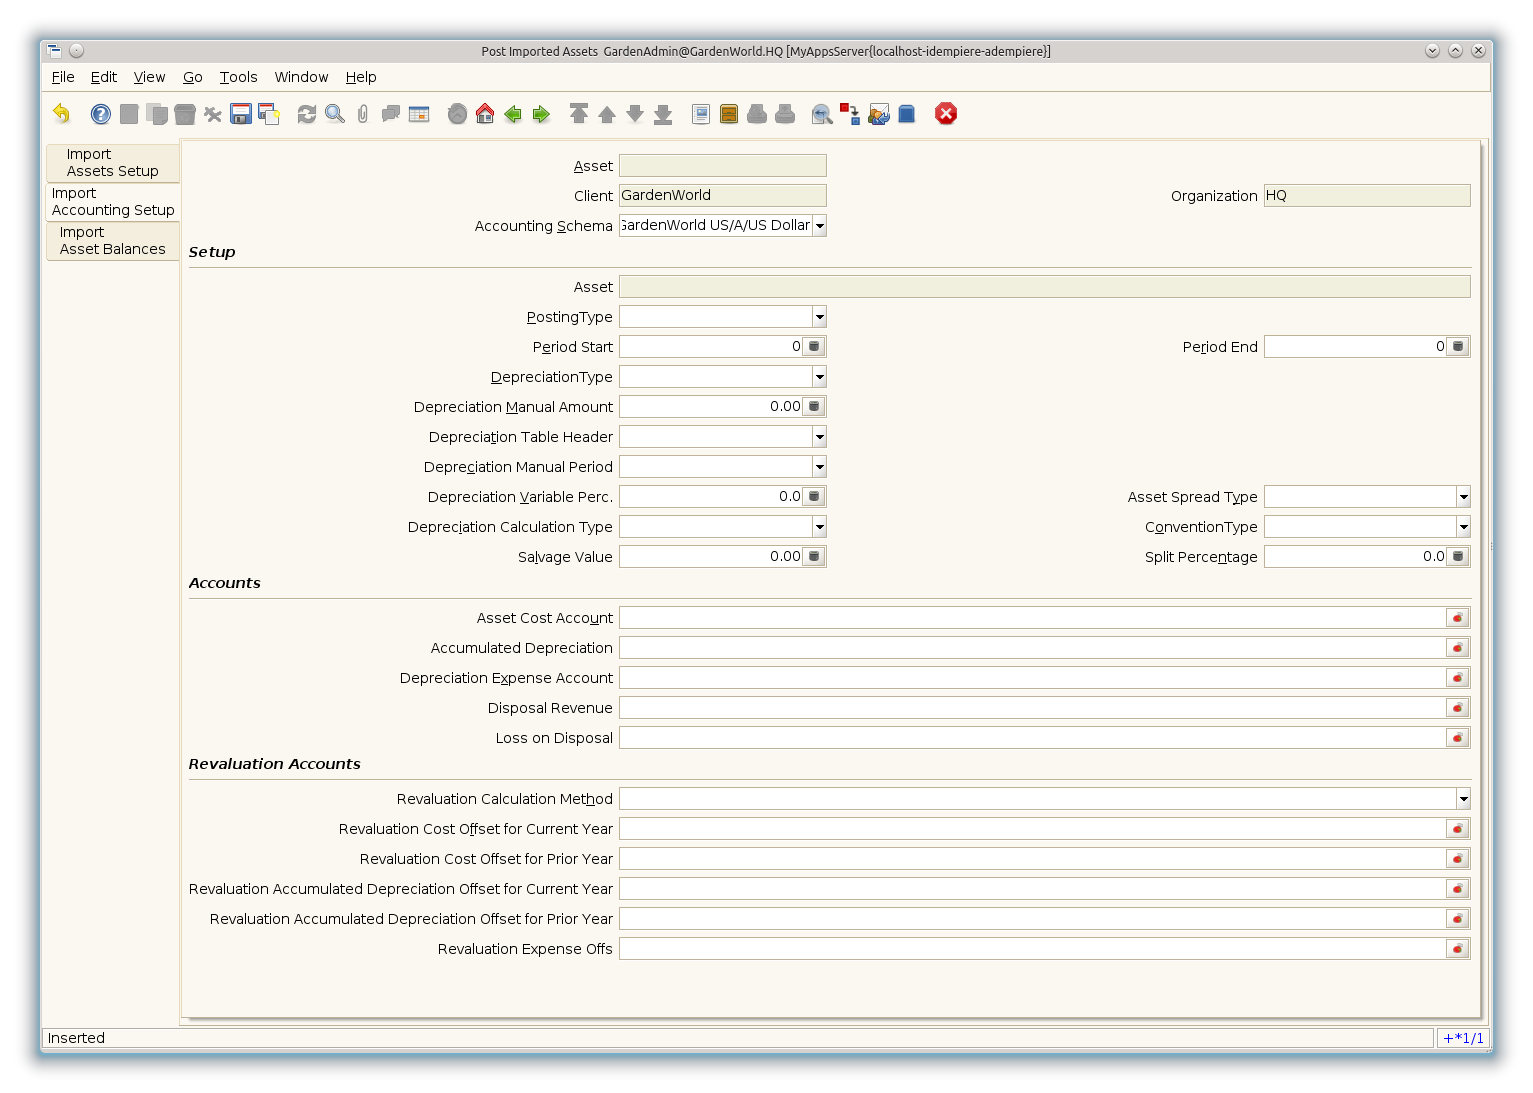 Post Imported Assets - Import Accounting Setup - Window (iDempiere 1.0.0).png